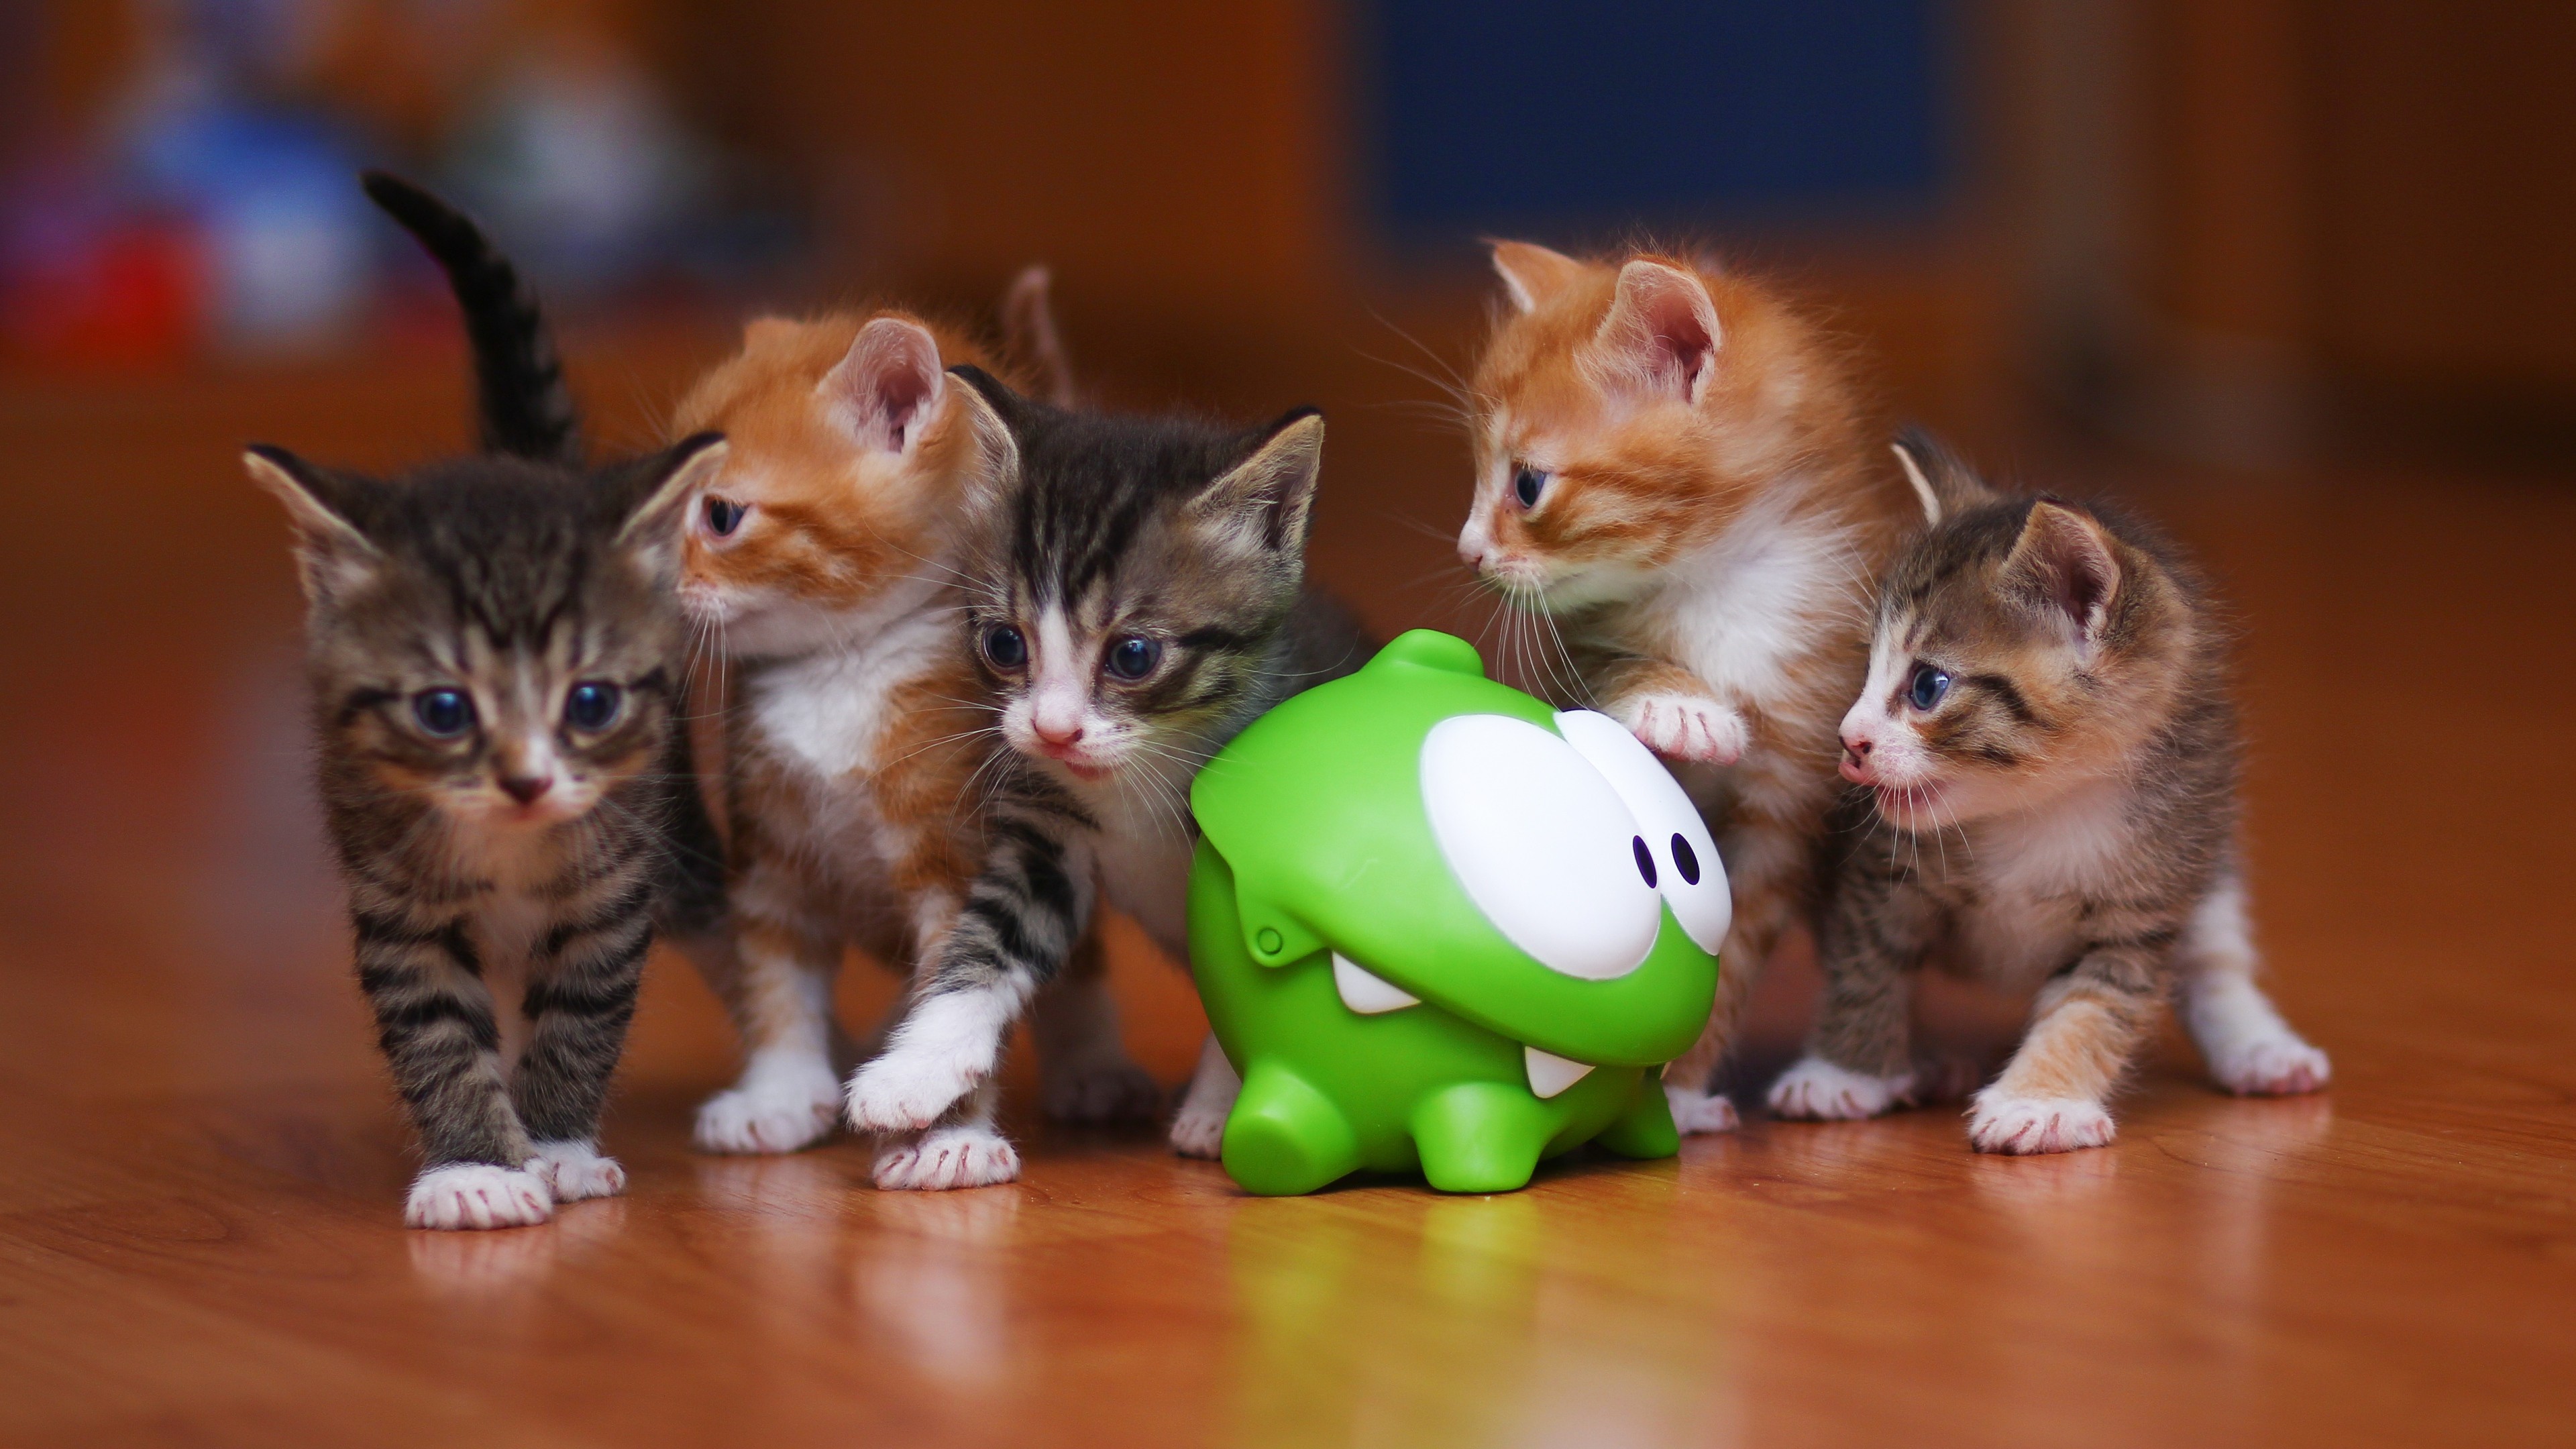 General 3840x2160 animals cats kittens toys feline baby animals Cut The Rope mammals indoors